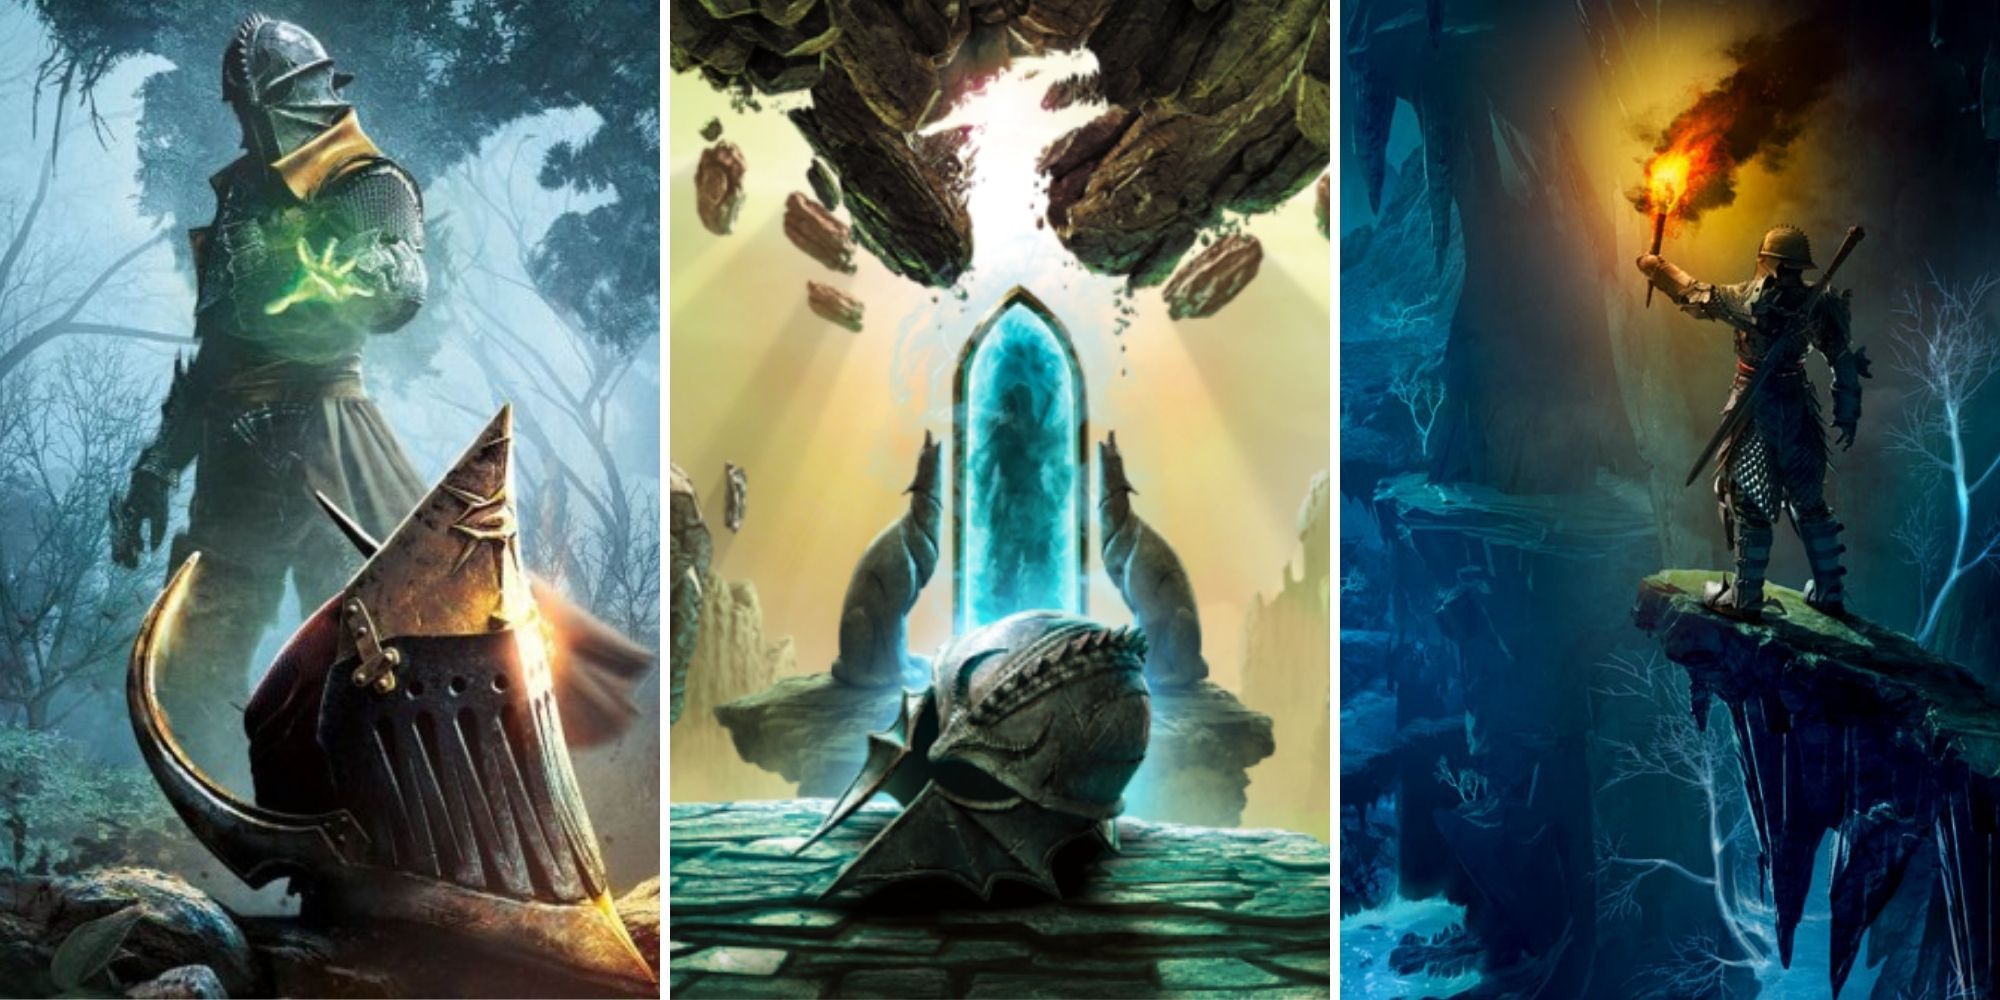 Dragon Age Inquisition Expansion Cover Art - Jaws of Hakkon on left, Trespasser in centre, The Descent on right